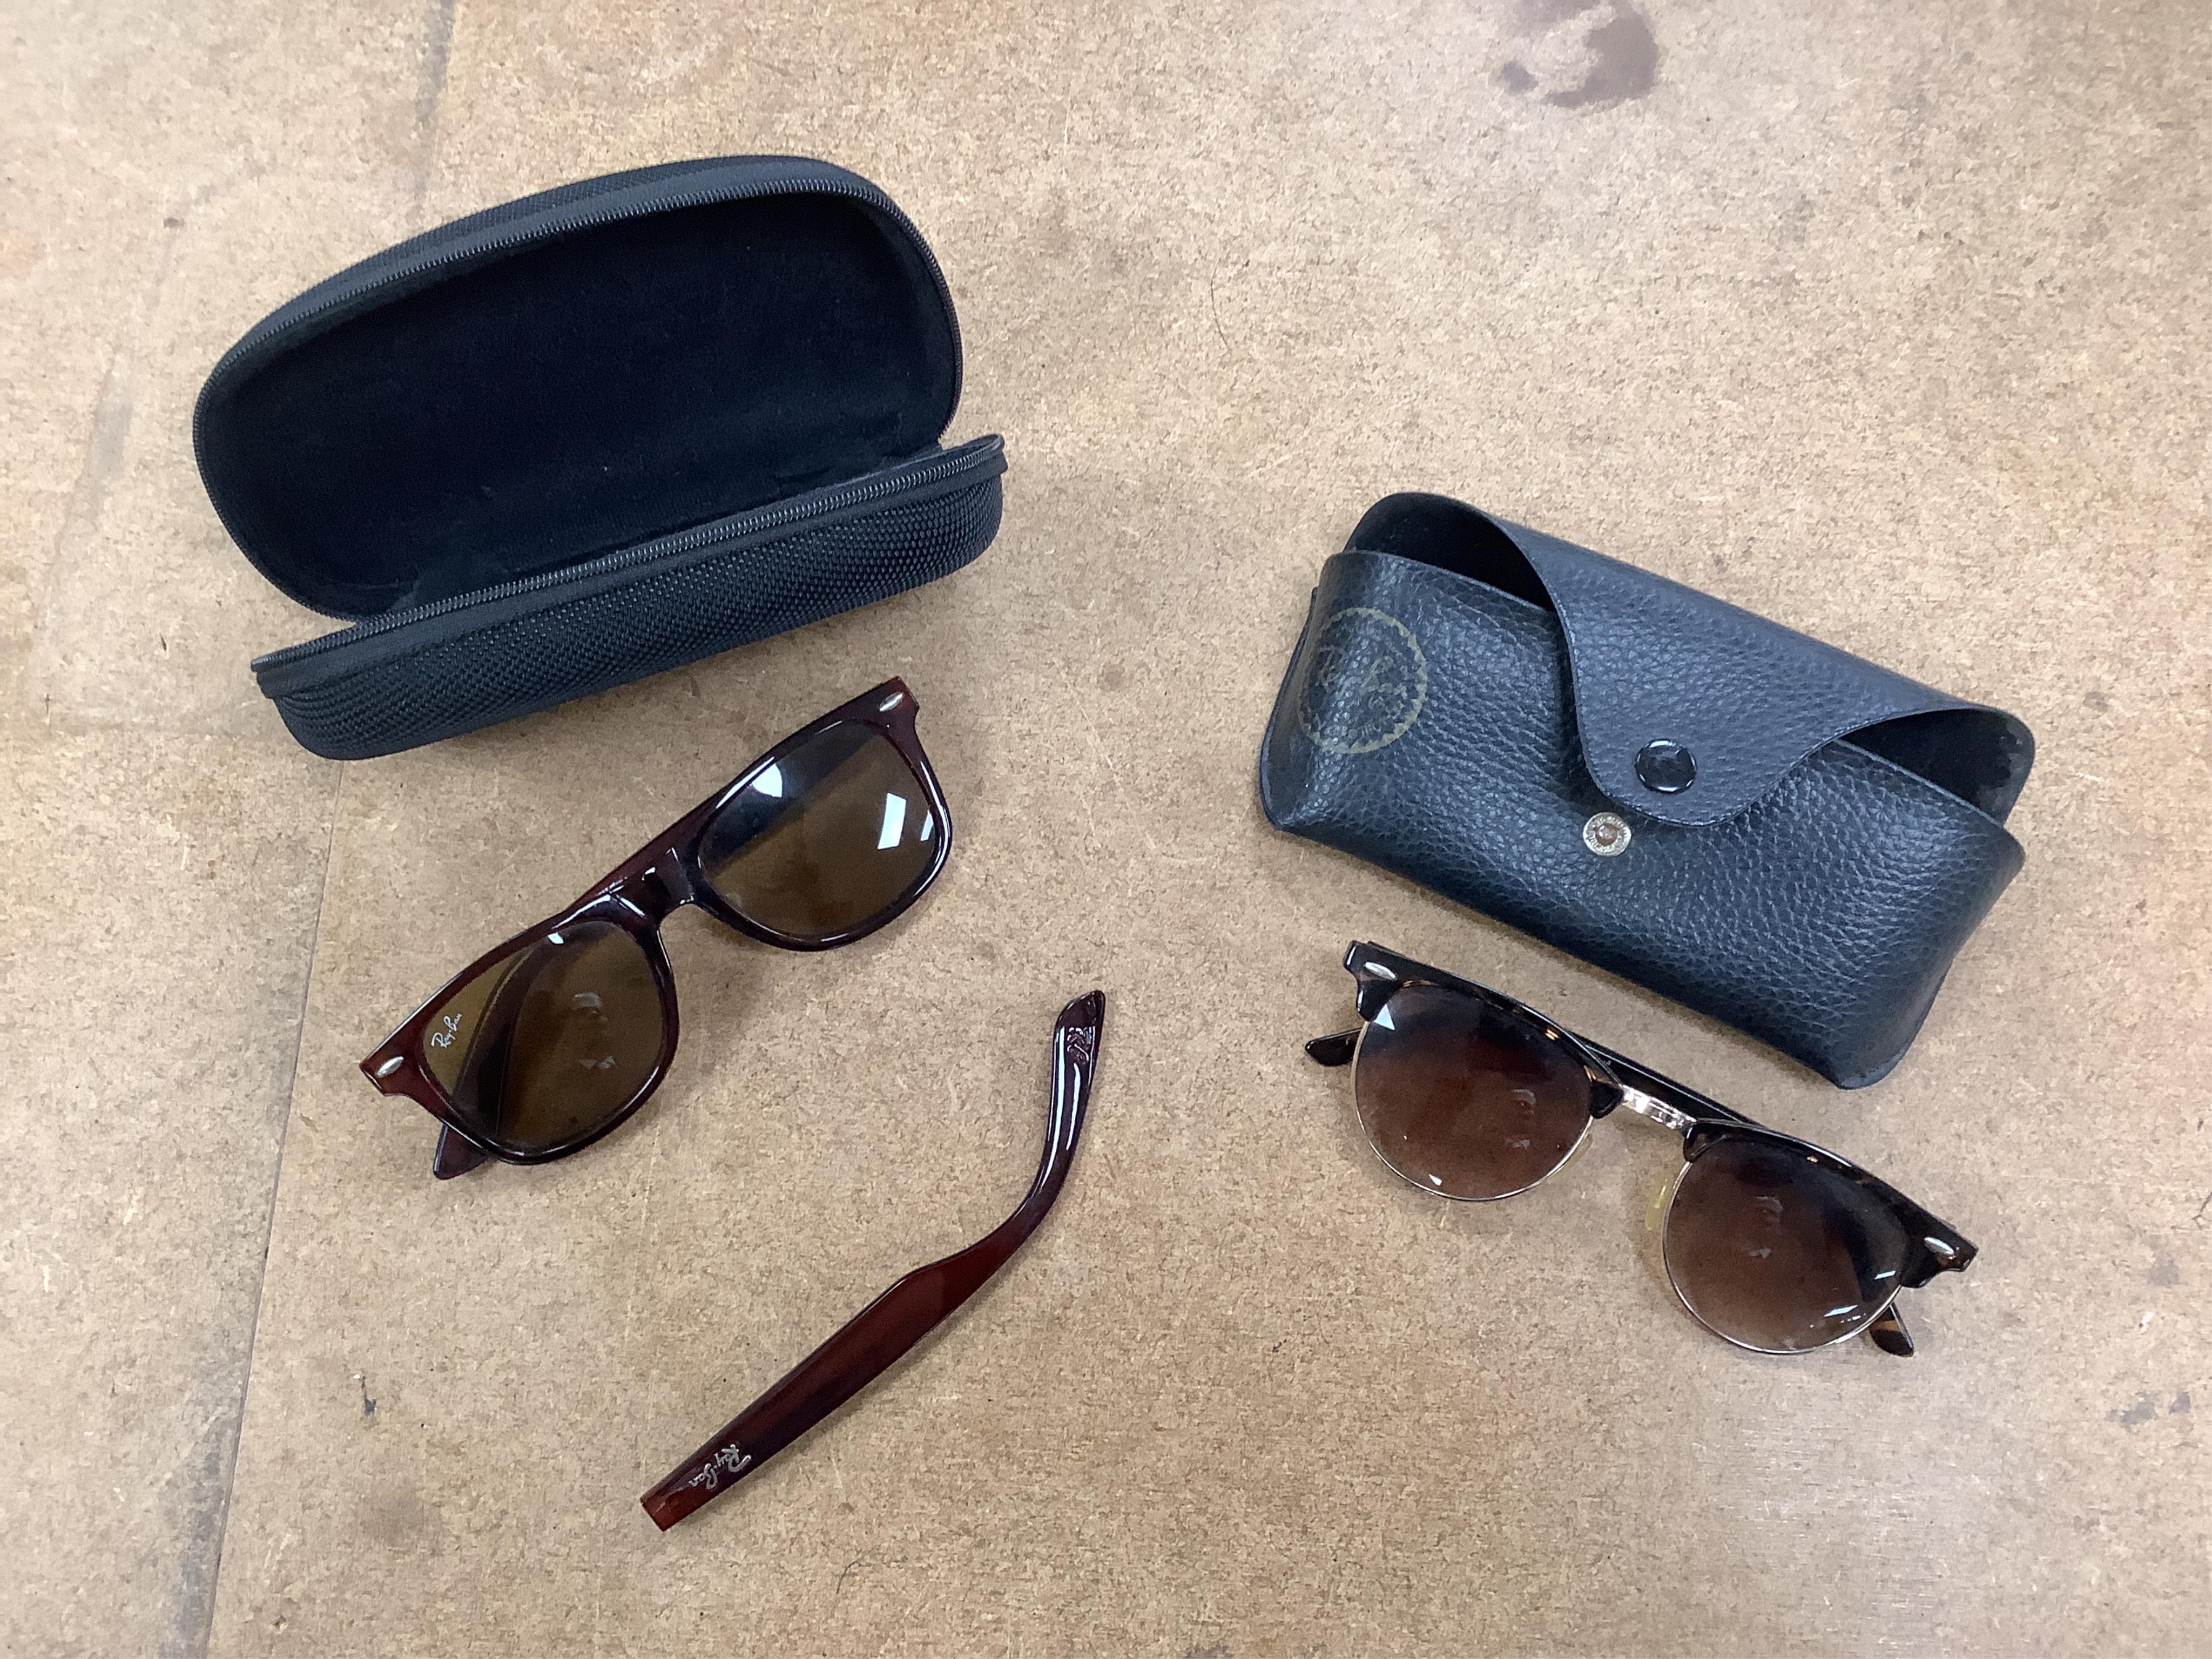 A collection of vintage Ray-Bans and other sunglasses